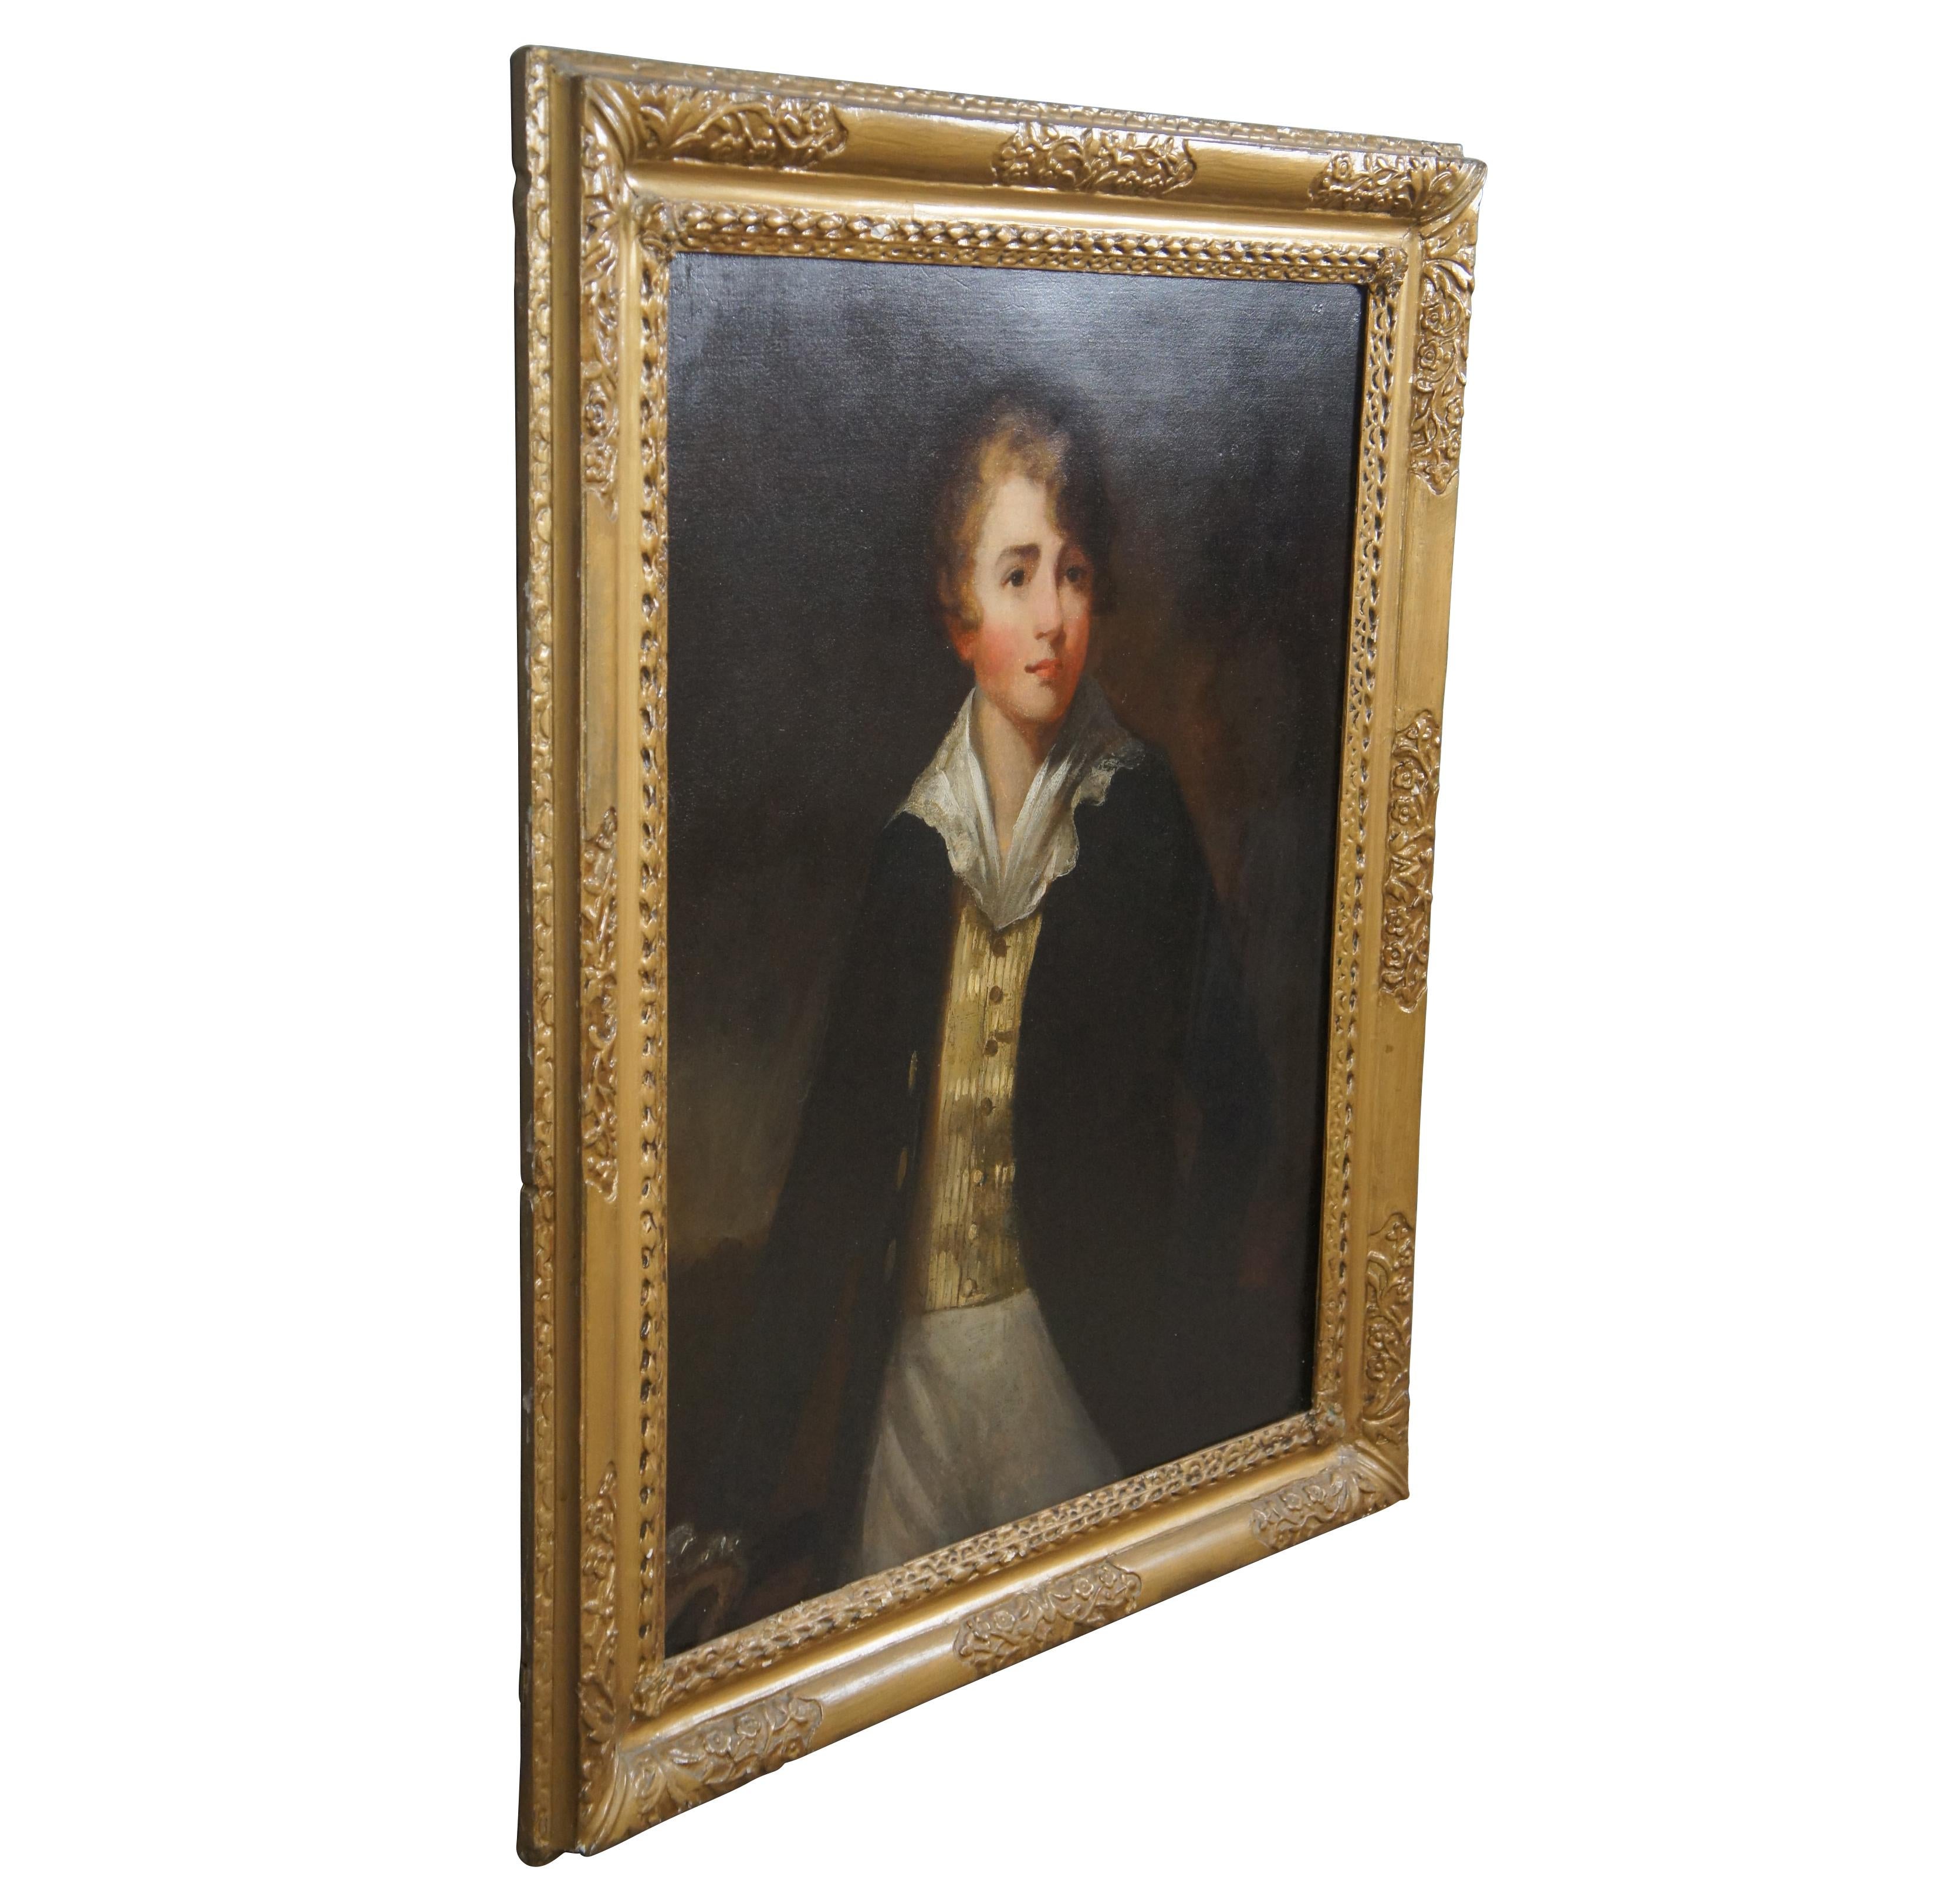 A lovely Victorian era oil painting of a stately young fellow posing in a yellow silk button down and formal jacket. The painting is neatly framed in gold with acanthus, foliate and diamond pattern detail. Canvas is marked along the top stretcher